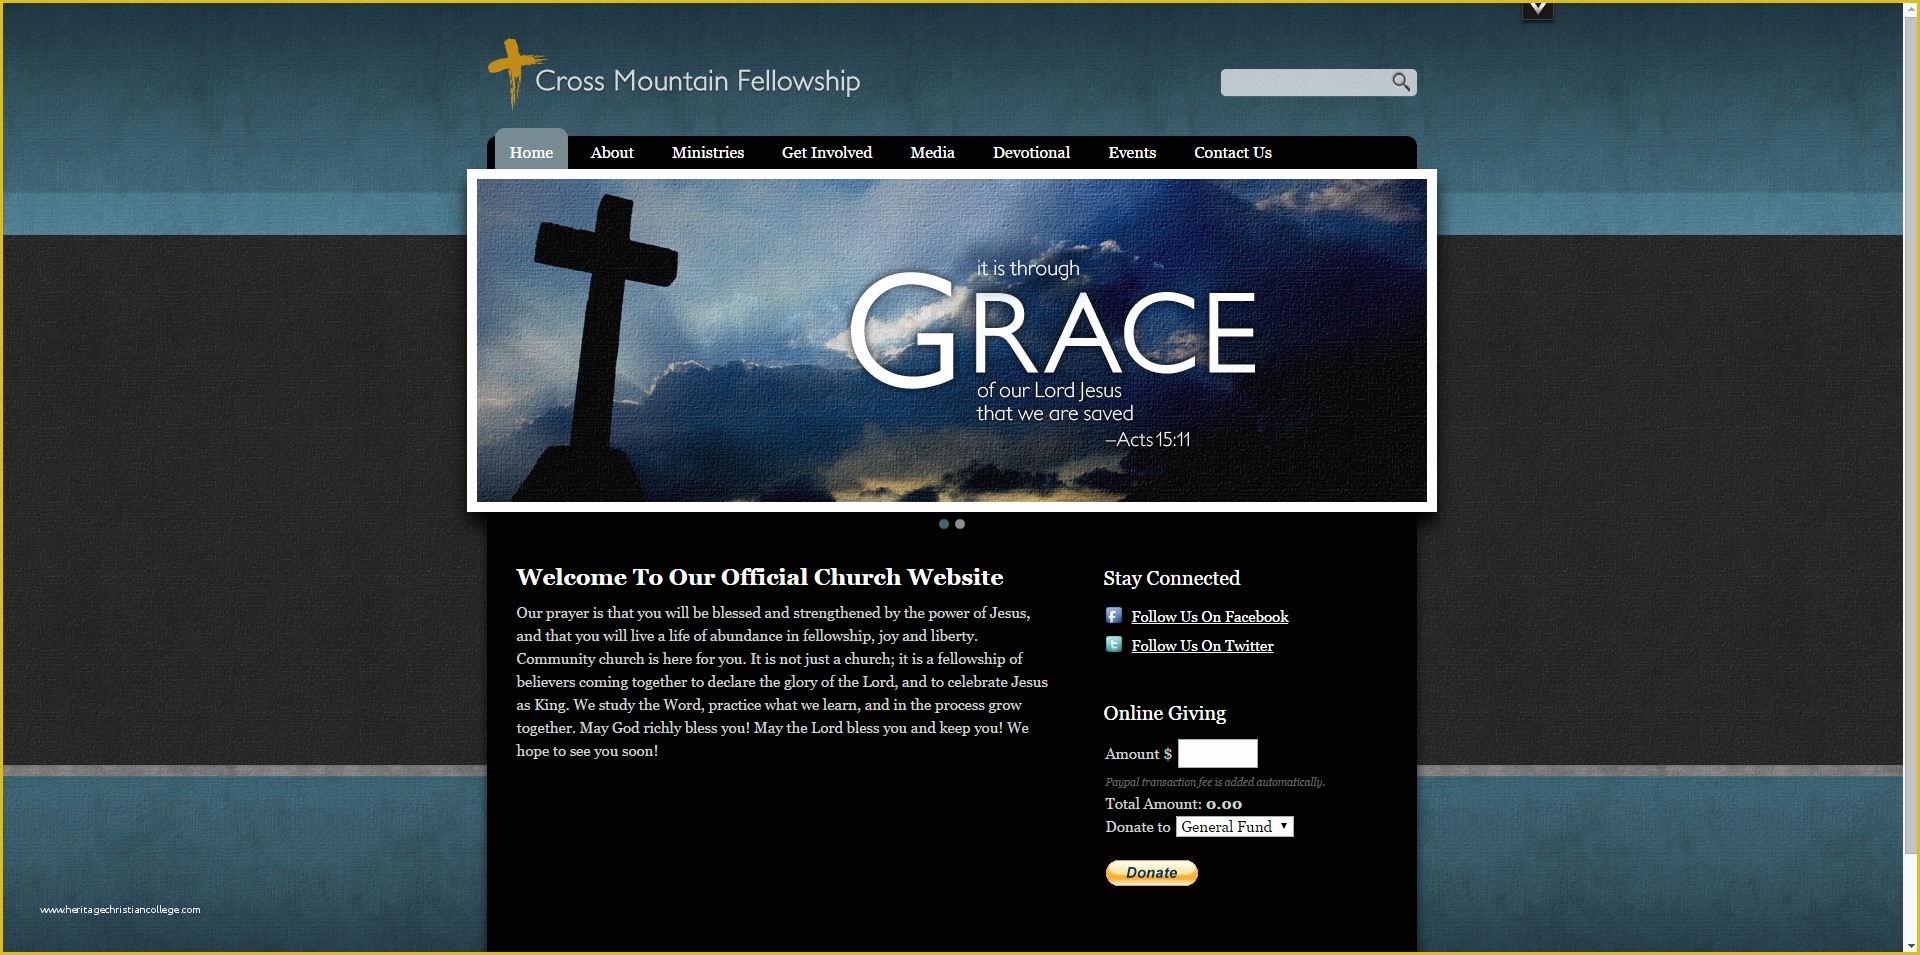 Free Christian Website Templates Of 30 Best Church Website Templates for Ministry and Outreach